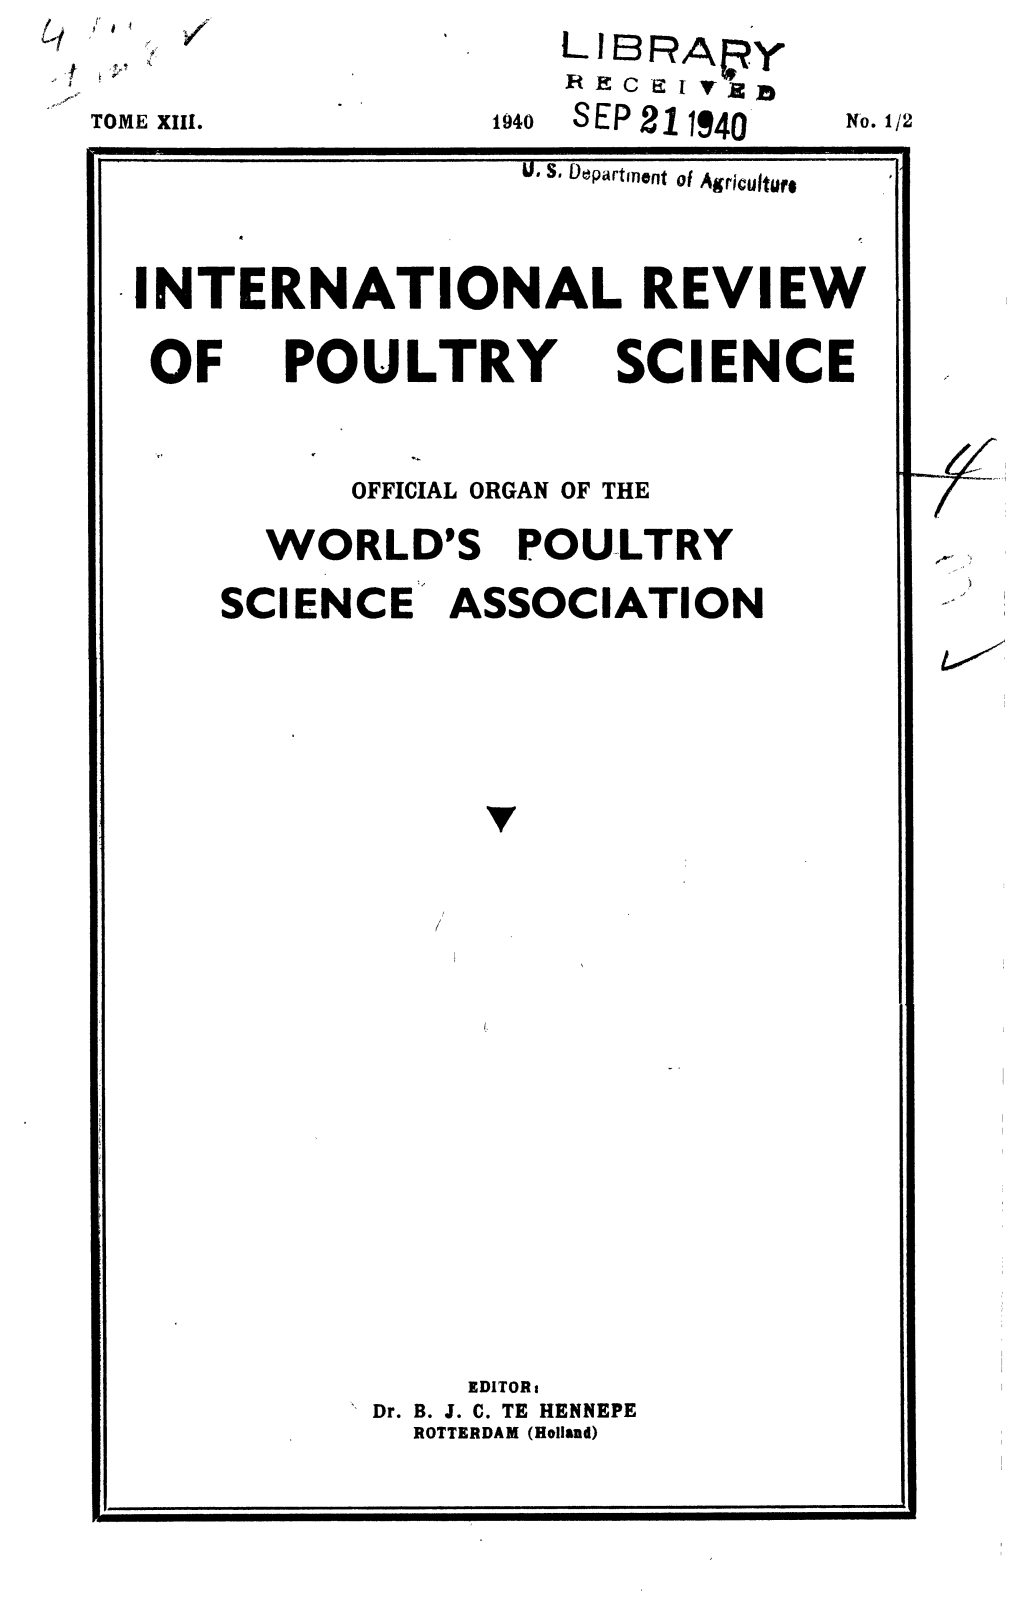 International Review of Poultry Science